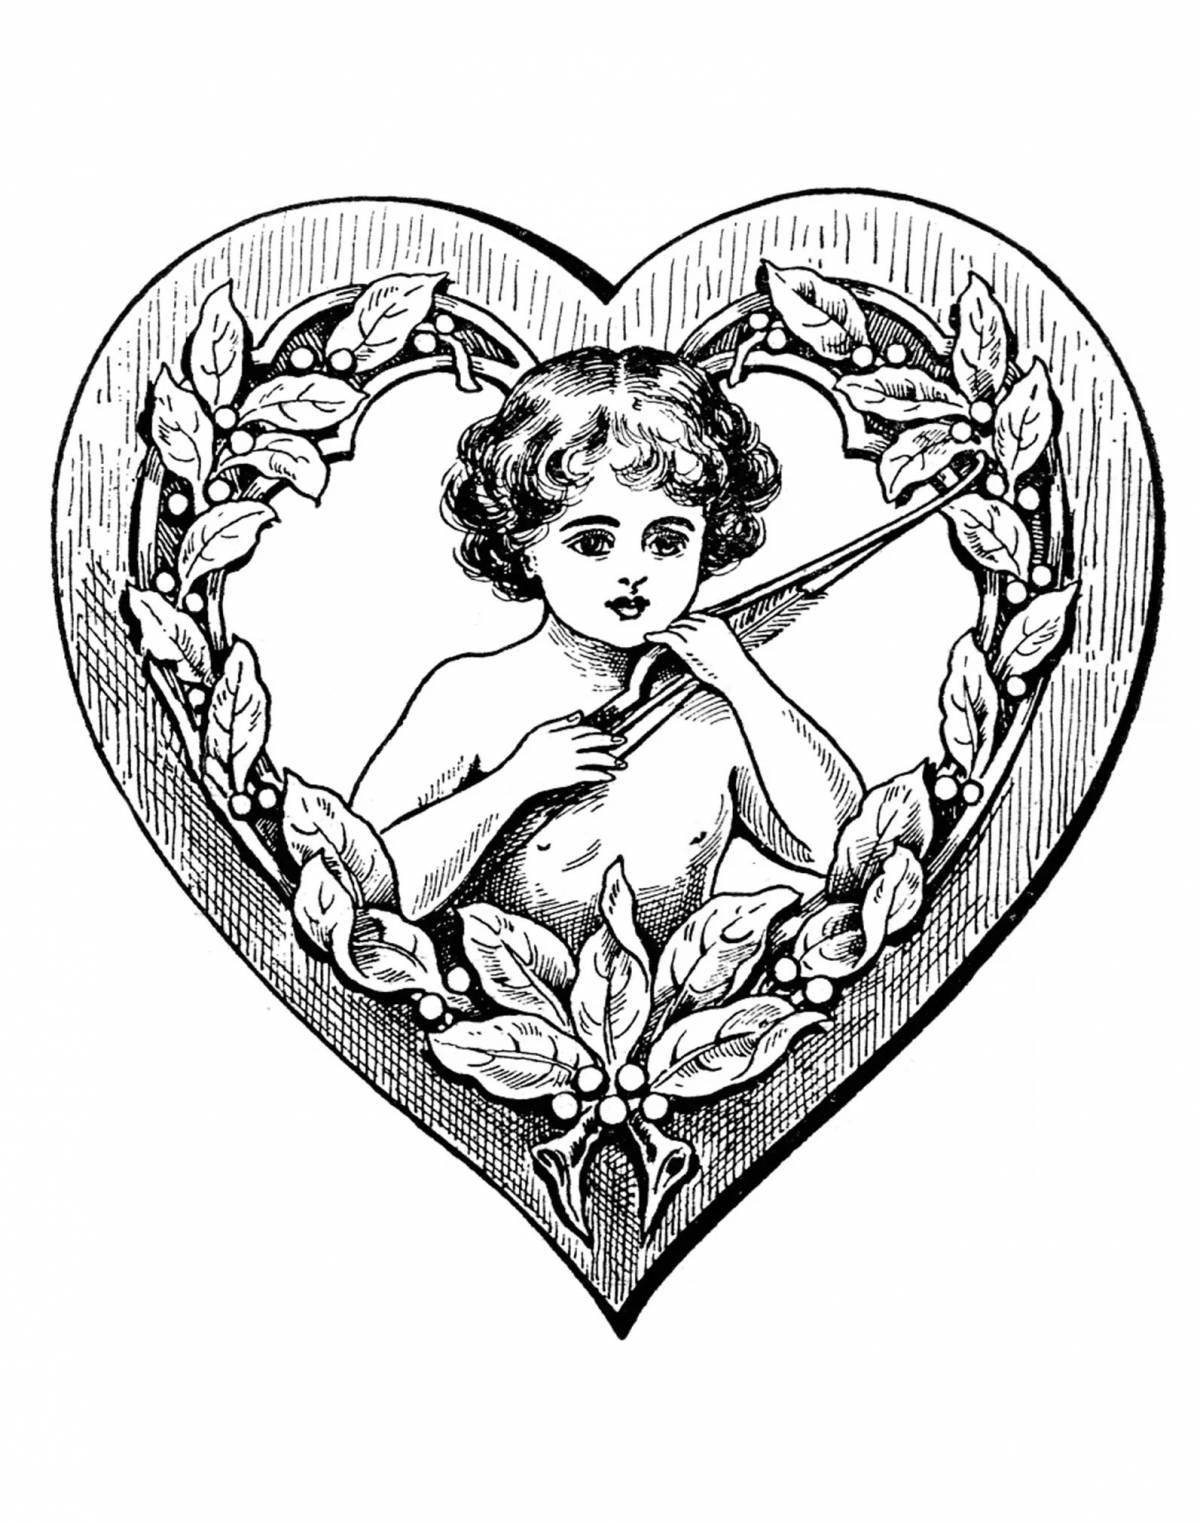 Coloring book bright cupid with heart